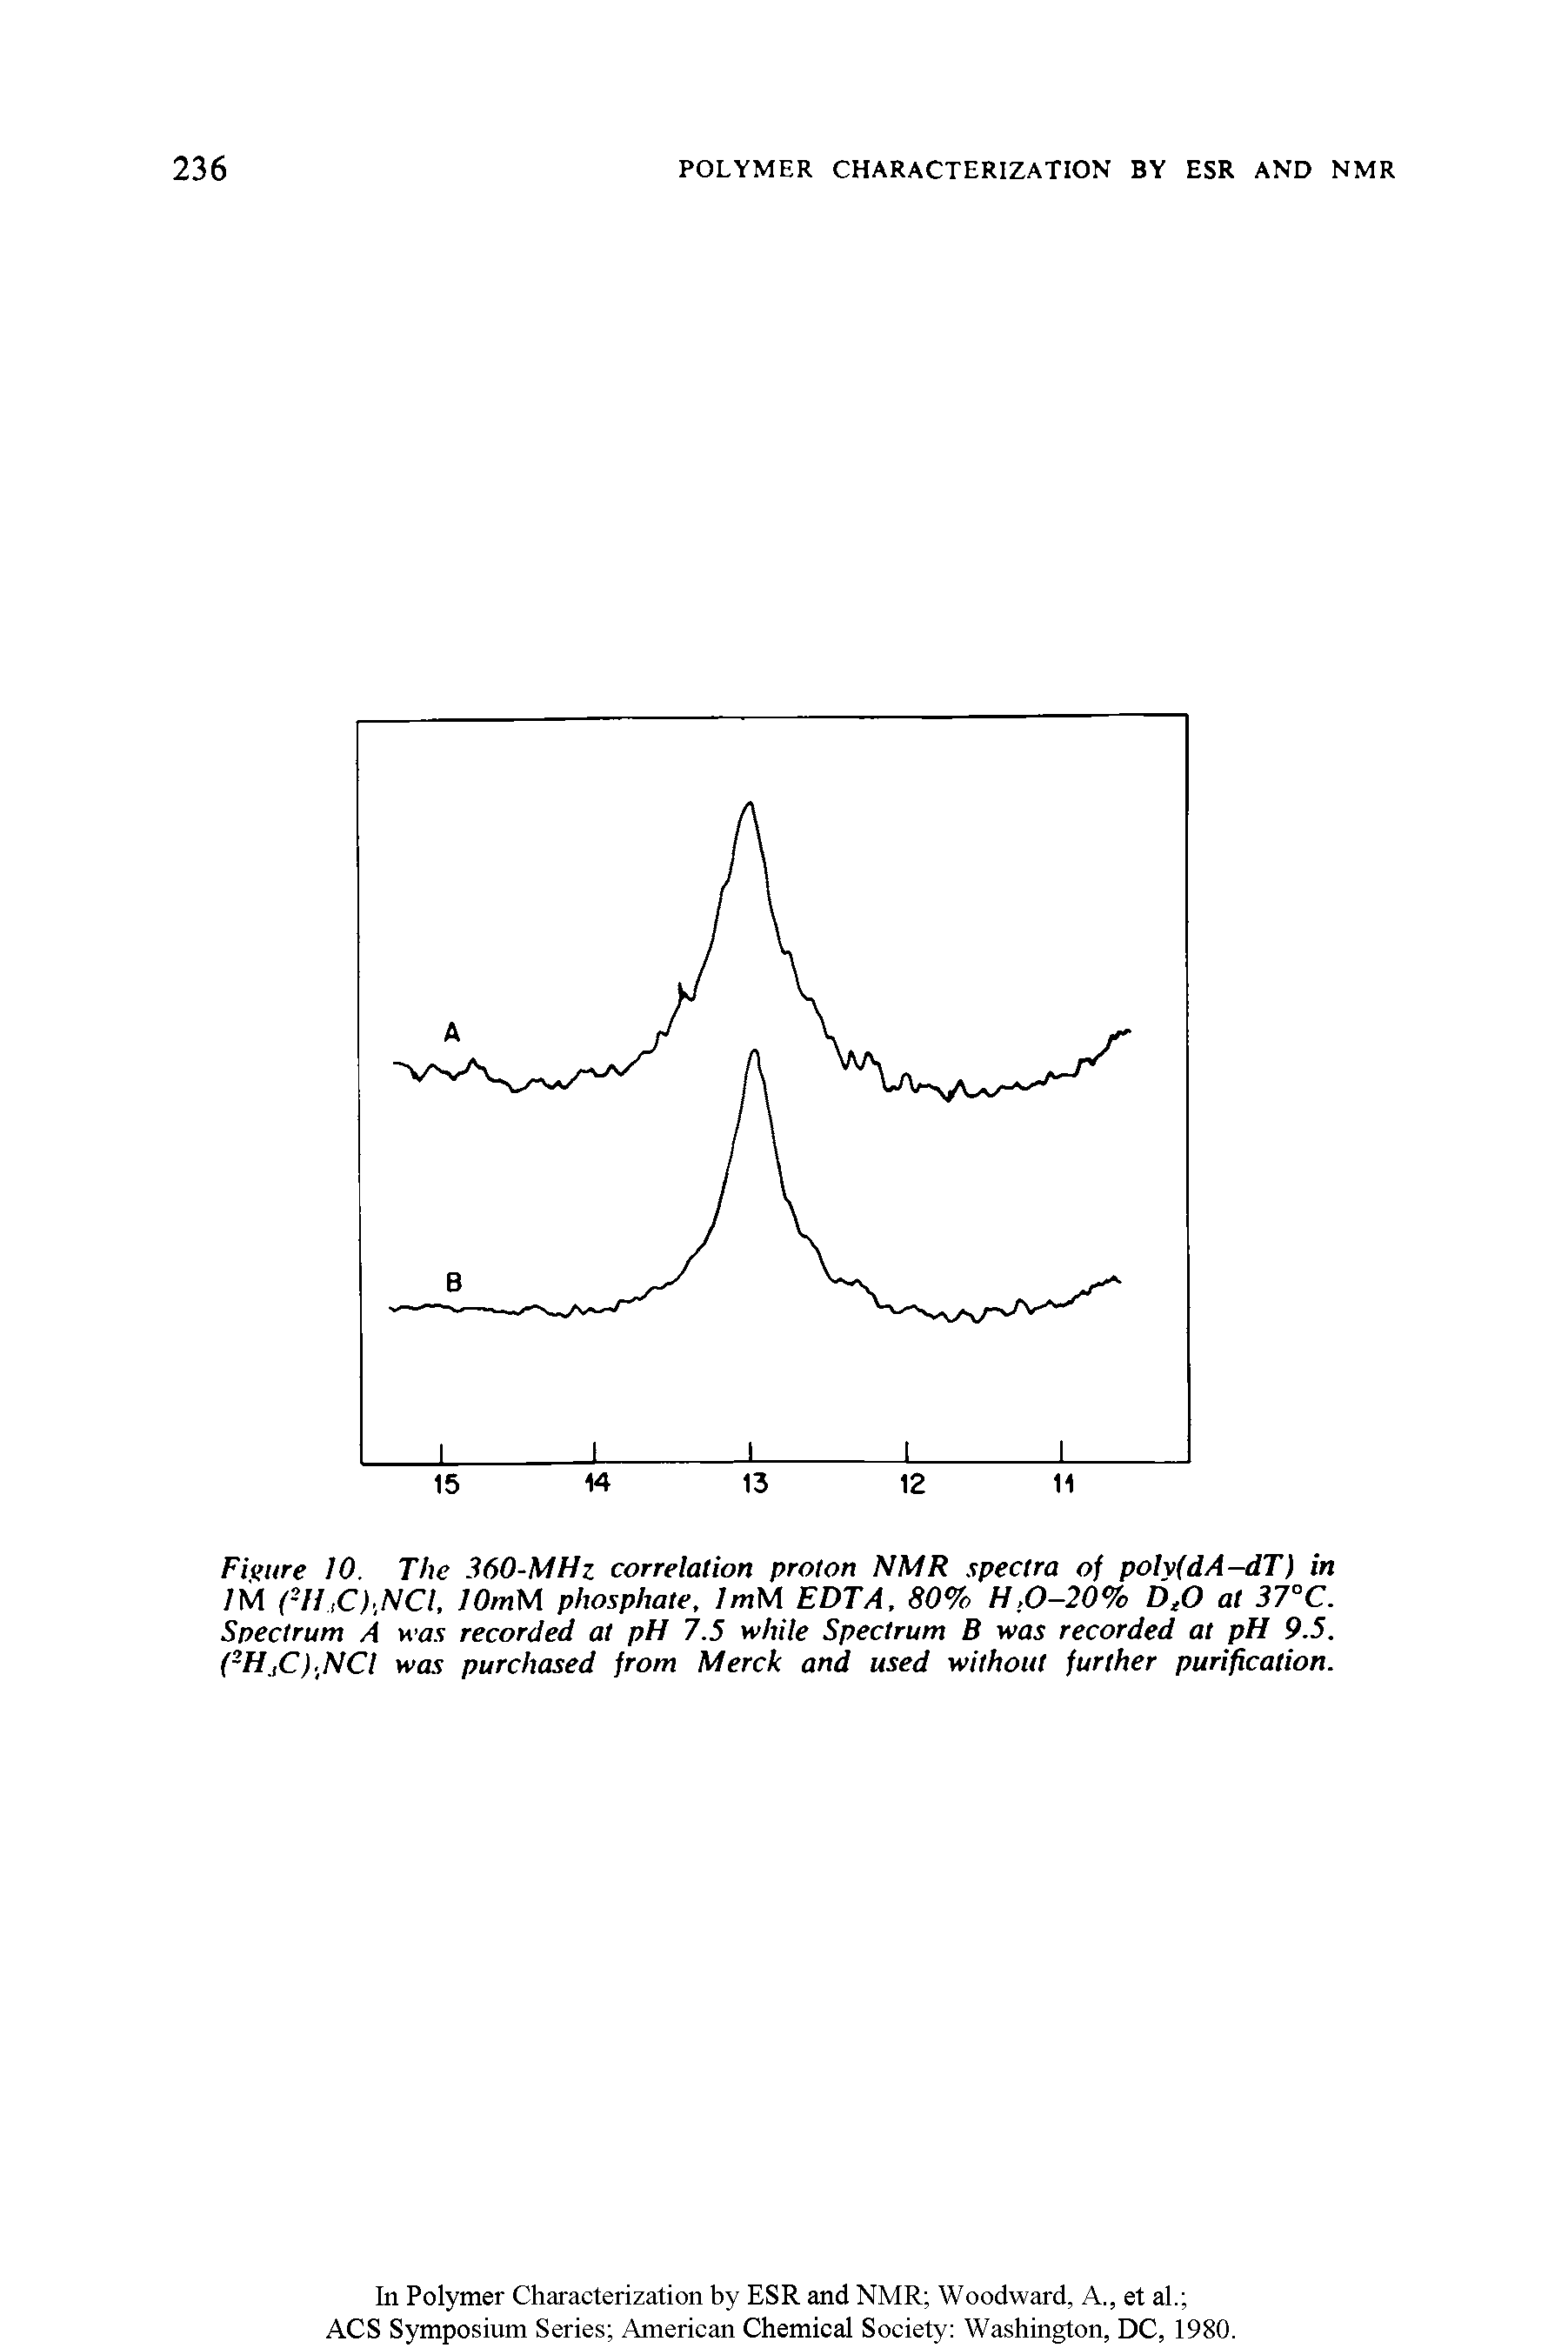 Figure 10. The 360-MHz correlation proton NMR spectra of poh(dA-dT) in 1M (-H,C),NCl. lOmM phosphate, ImM EDTA, 80% H,0-20% DtO at 37°C. Spectrum A mot recorded at pH 7.5 while Spectrum B wot recorded at pH 9.5. (2H C).NCl was purchased from Merck and used without further purification.